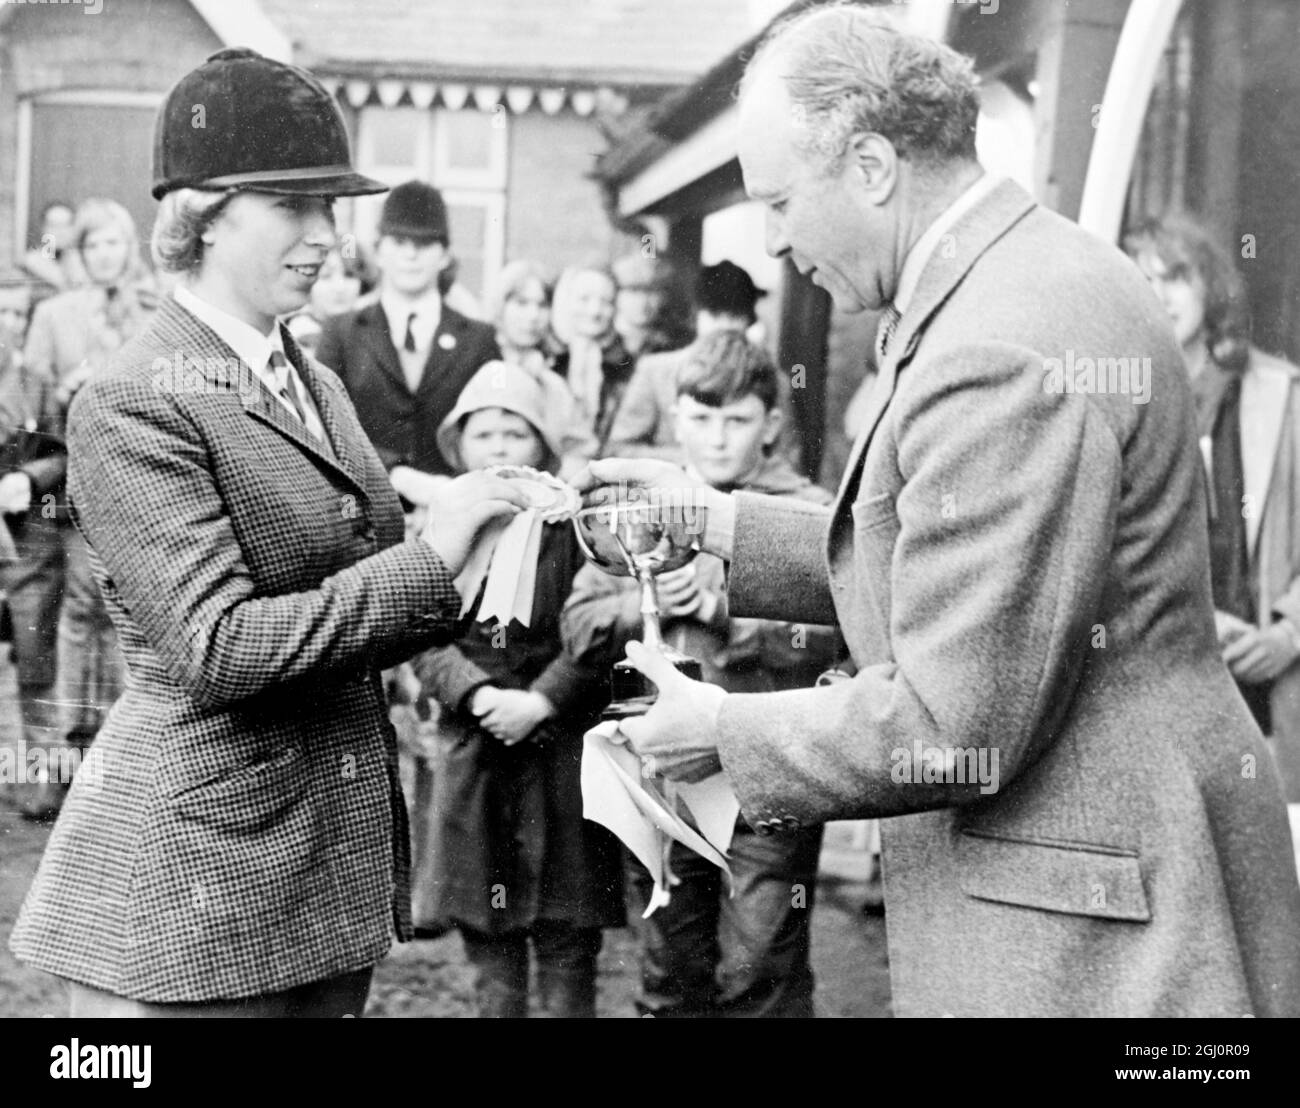 Another prize for Princess Anne . Tweedlesdown , hampshire : Princess Anne , daughter of Britain's Queen Elizabeth II , is pictured here receiving an award and a rosette from Brigadier DT bastin for her performance at the Staff College and Sandhurst Pony Club Horse Trials , on her pony '' High Jinks '' . The Princess won the award for the under-17 competitors in the individual . She had brilliant marks in the dressage , no faults in the cross-country and no faults in the show jumping. She was riding for the Garth Junior Pony Club . 23 April 1966 Stock Photo